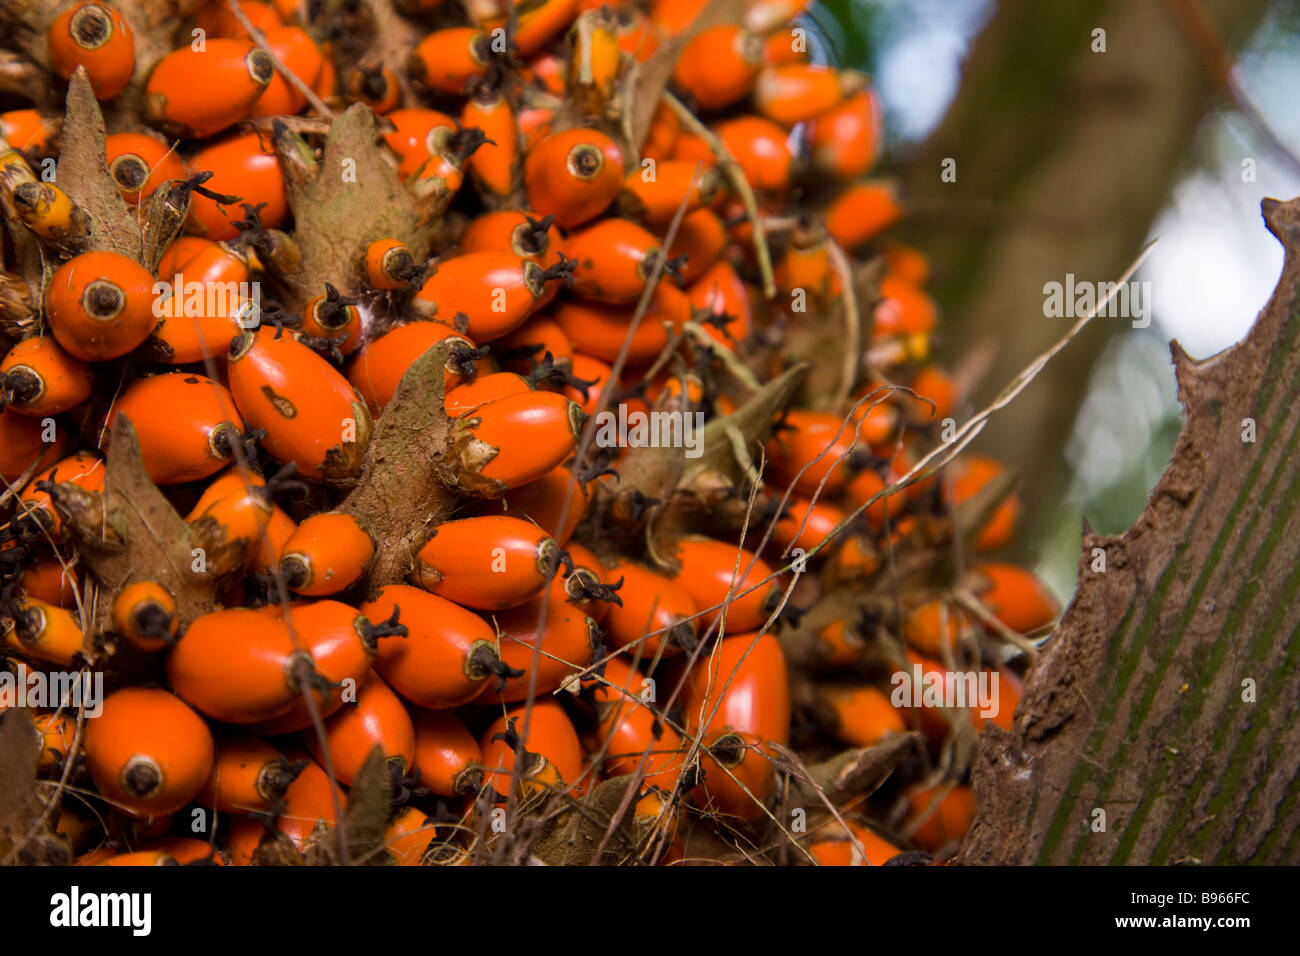 African oil palm seeds (Elaeis guineensis) growing in the Osa Peninsula of Costa Rica. Stock Photo